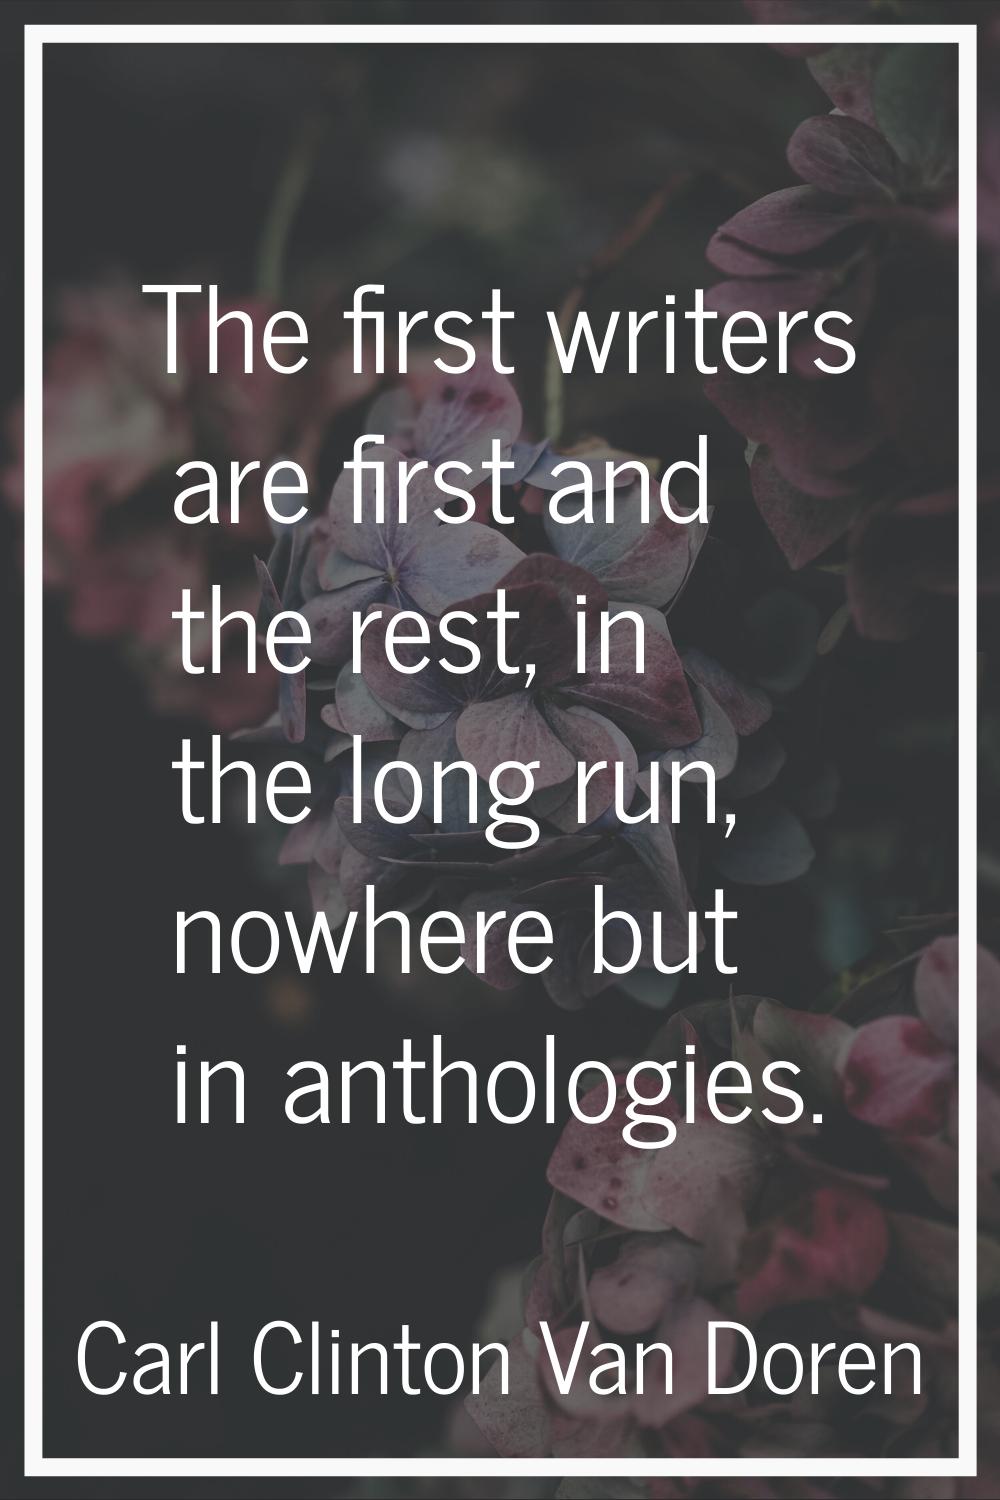 The first writers are first and the rest, in the long run, nowhere but in anthologies.